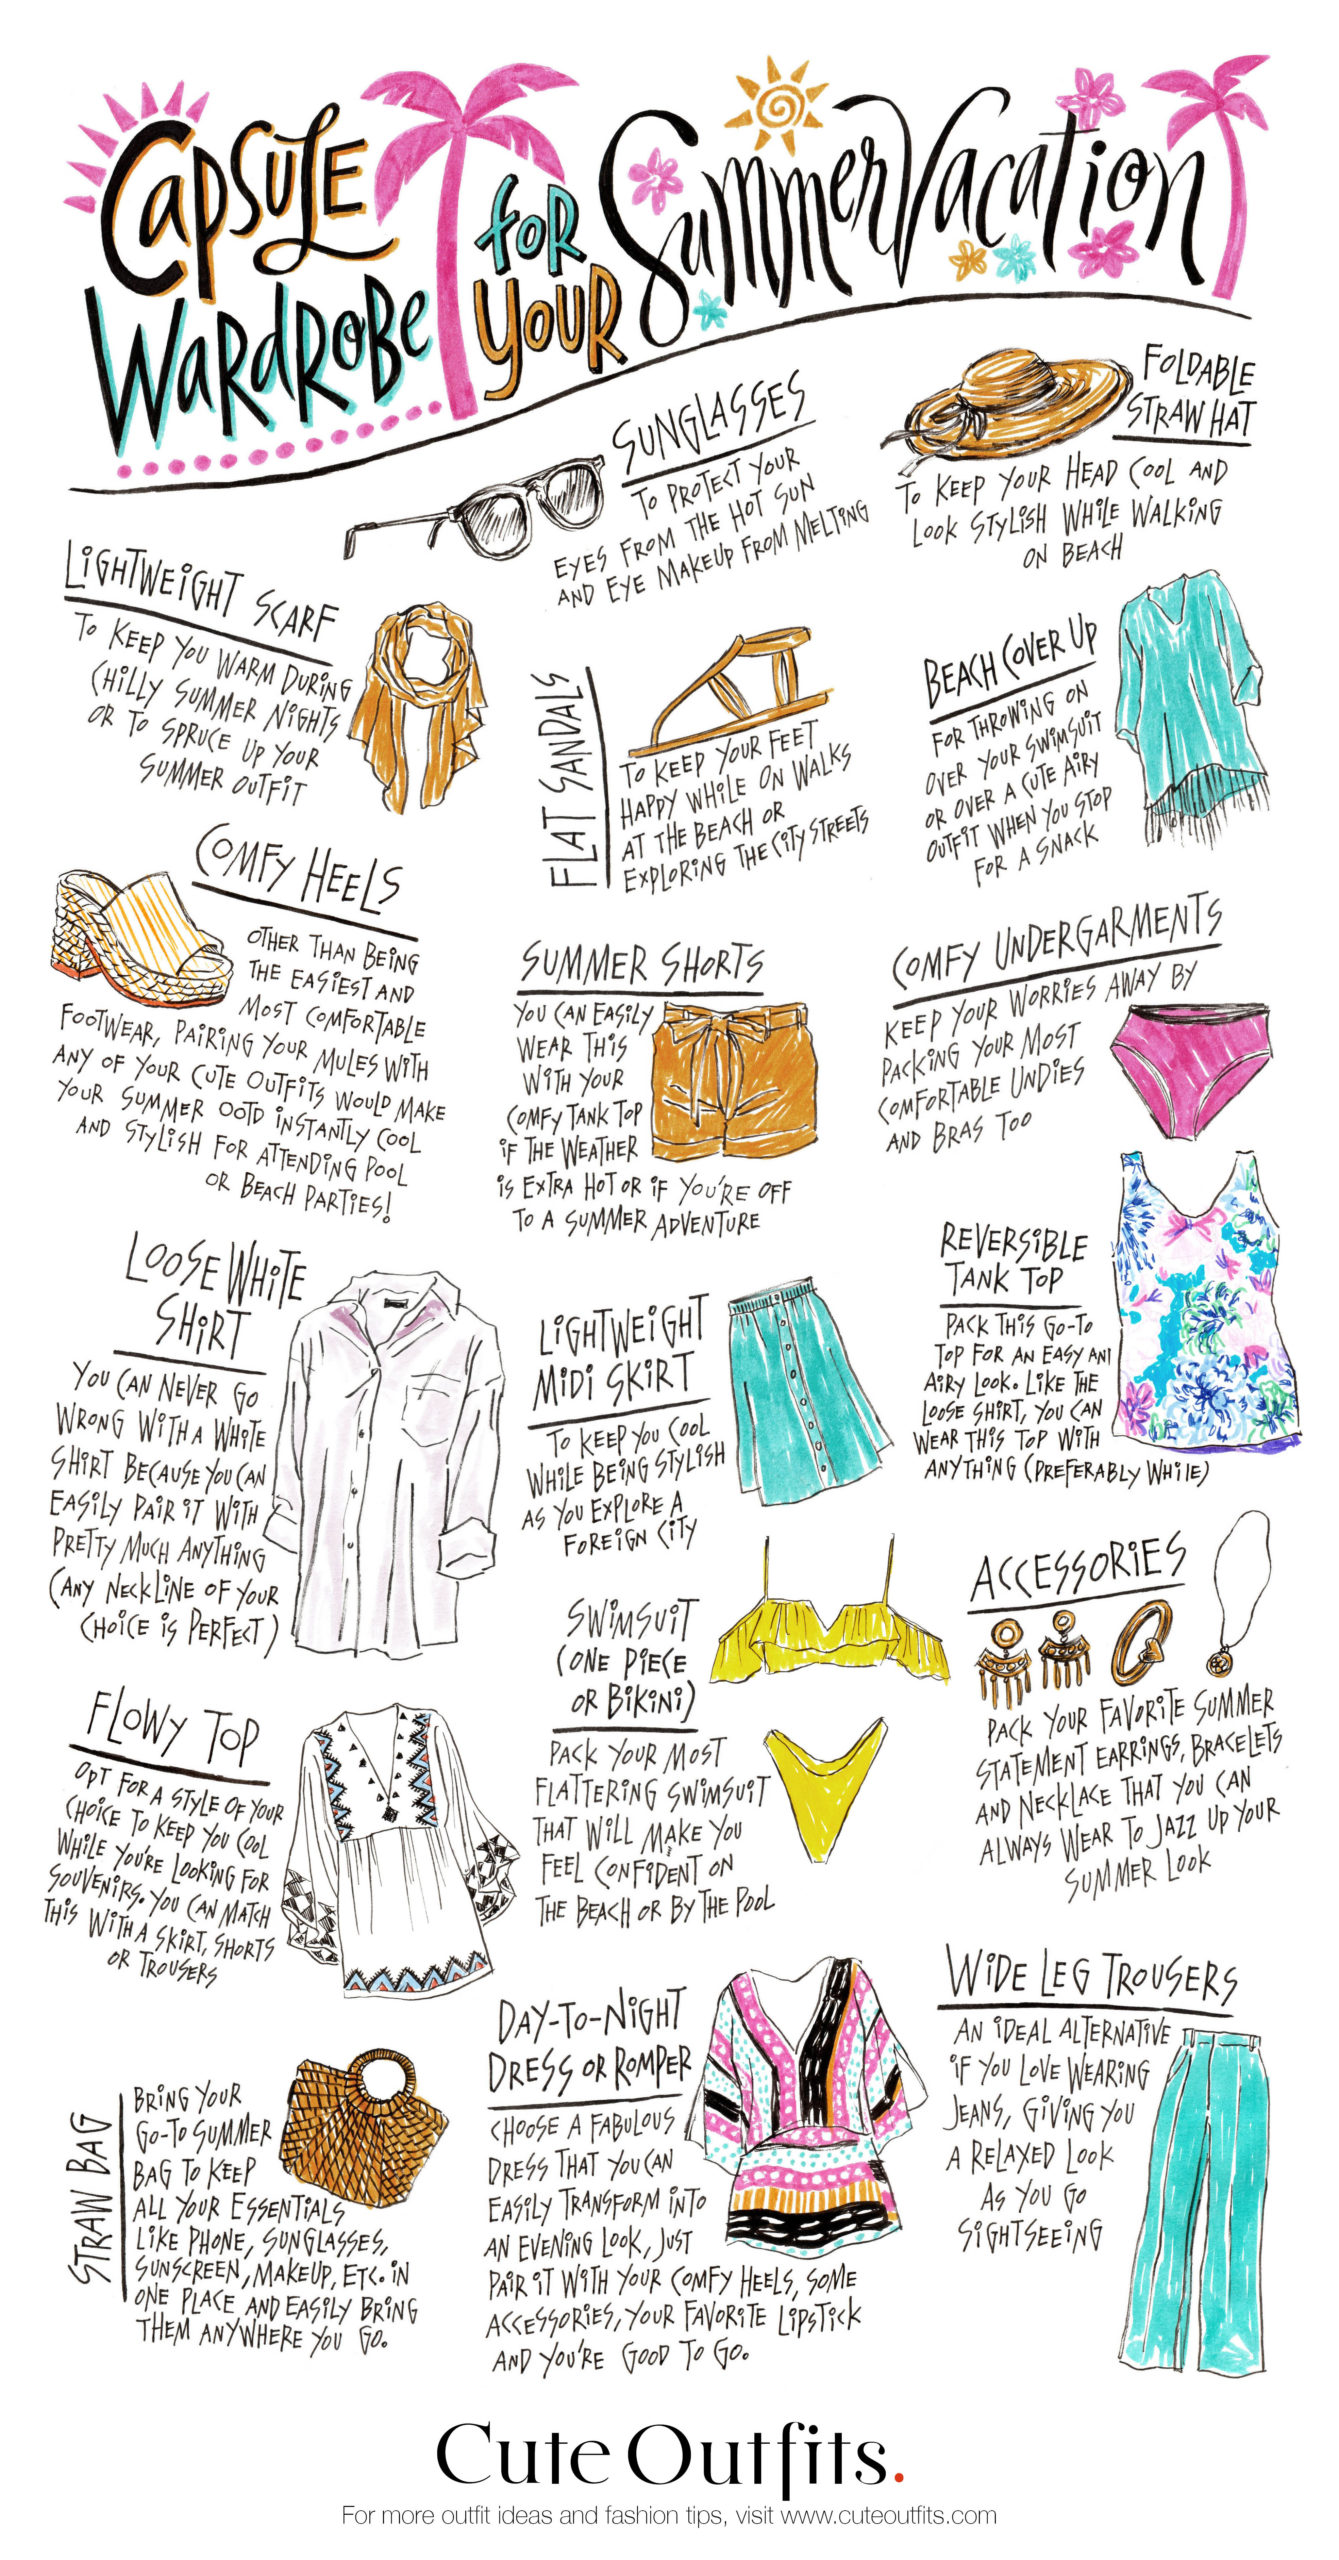 15 Must-Have Sexy Summer Outfits For A Sizzling Summer [INFOGRAPHIC]